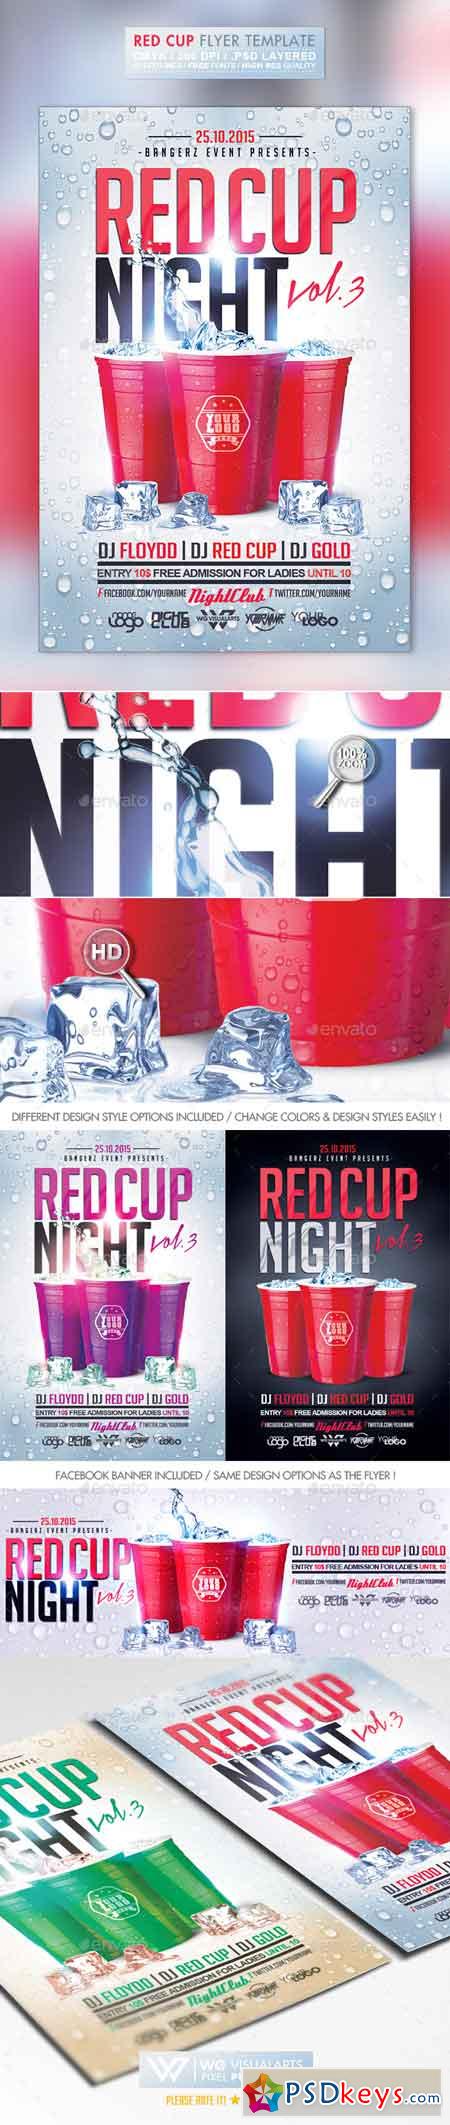 Red Cup Party Flyer Template 10328759